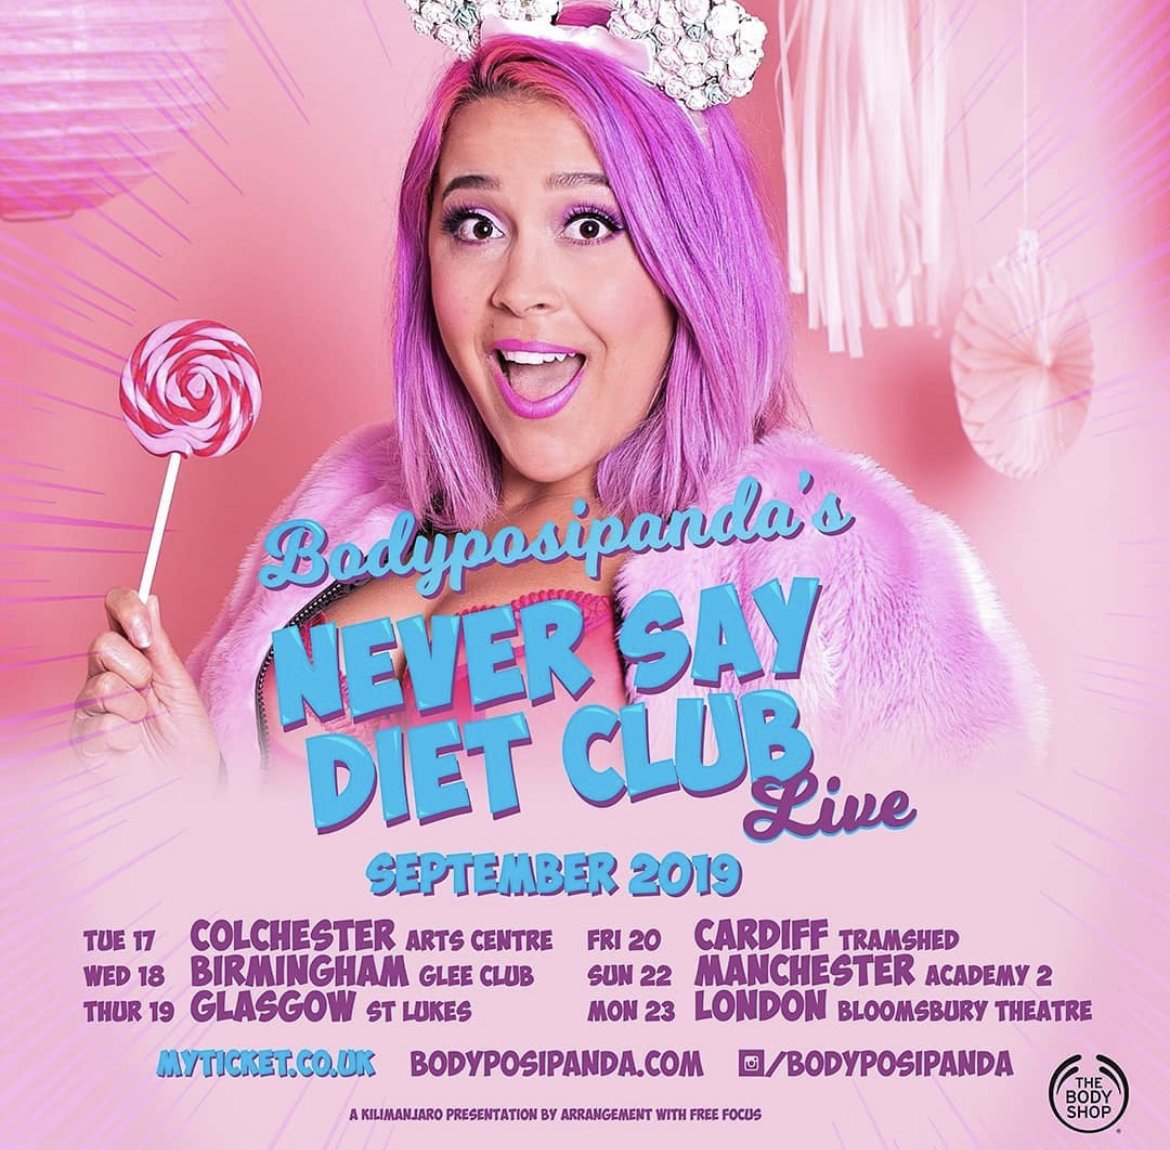  Promotional poster of Megan Jayne Crabbe (Bodyposipanda)’s Never Say Diet Club live shows tour 